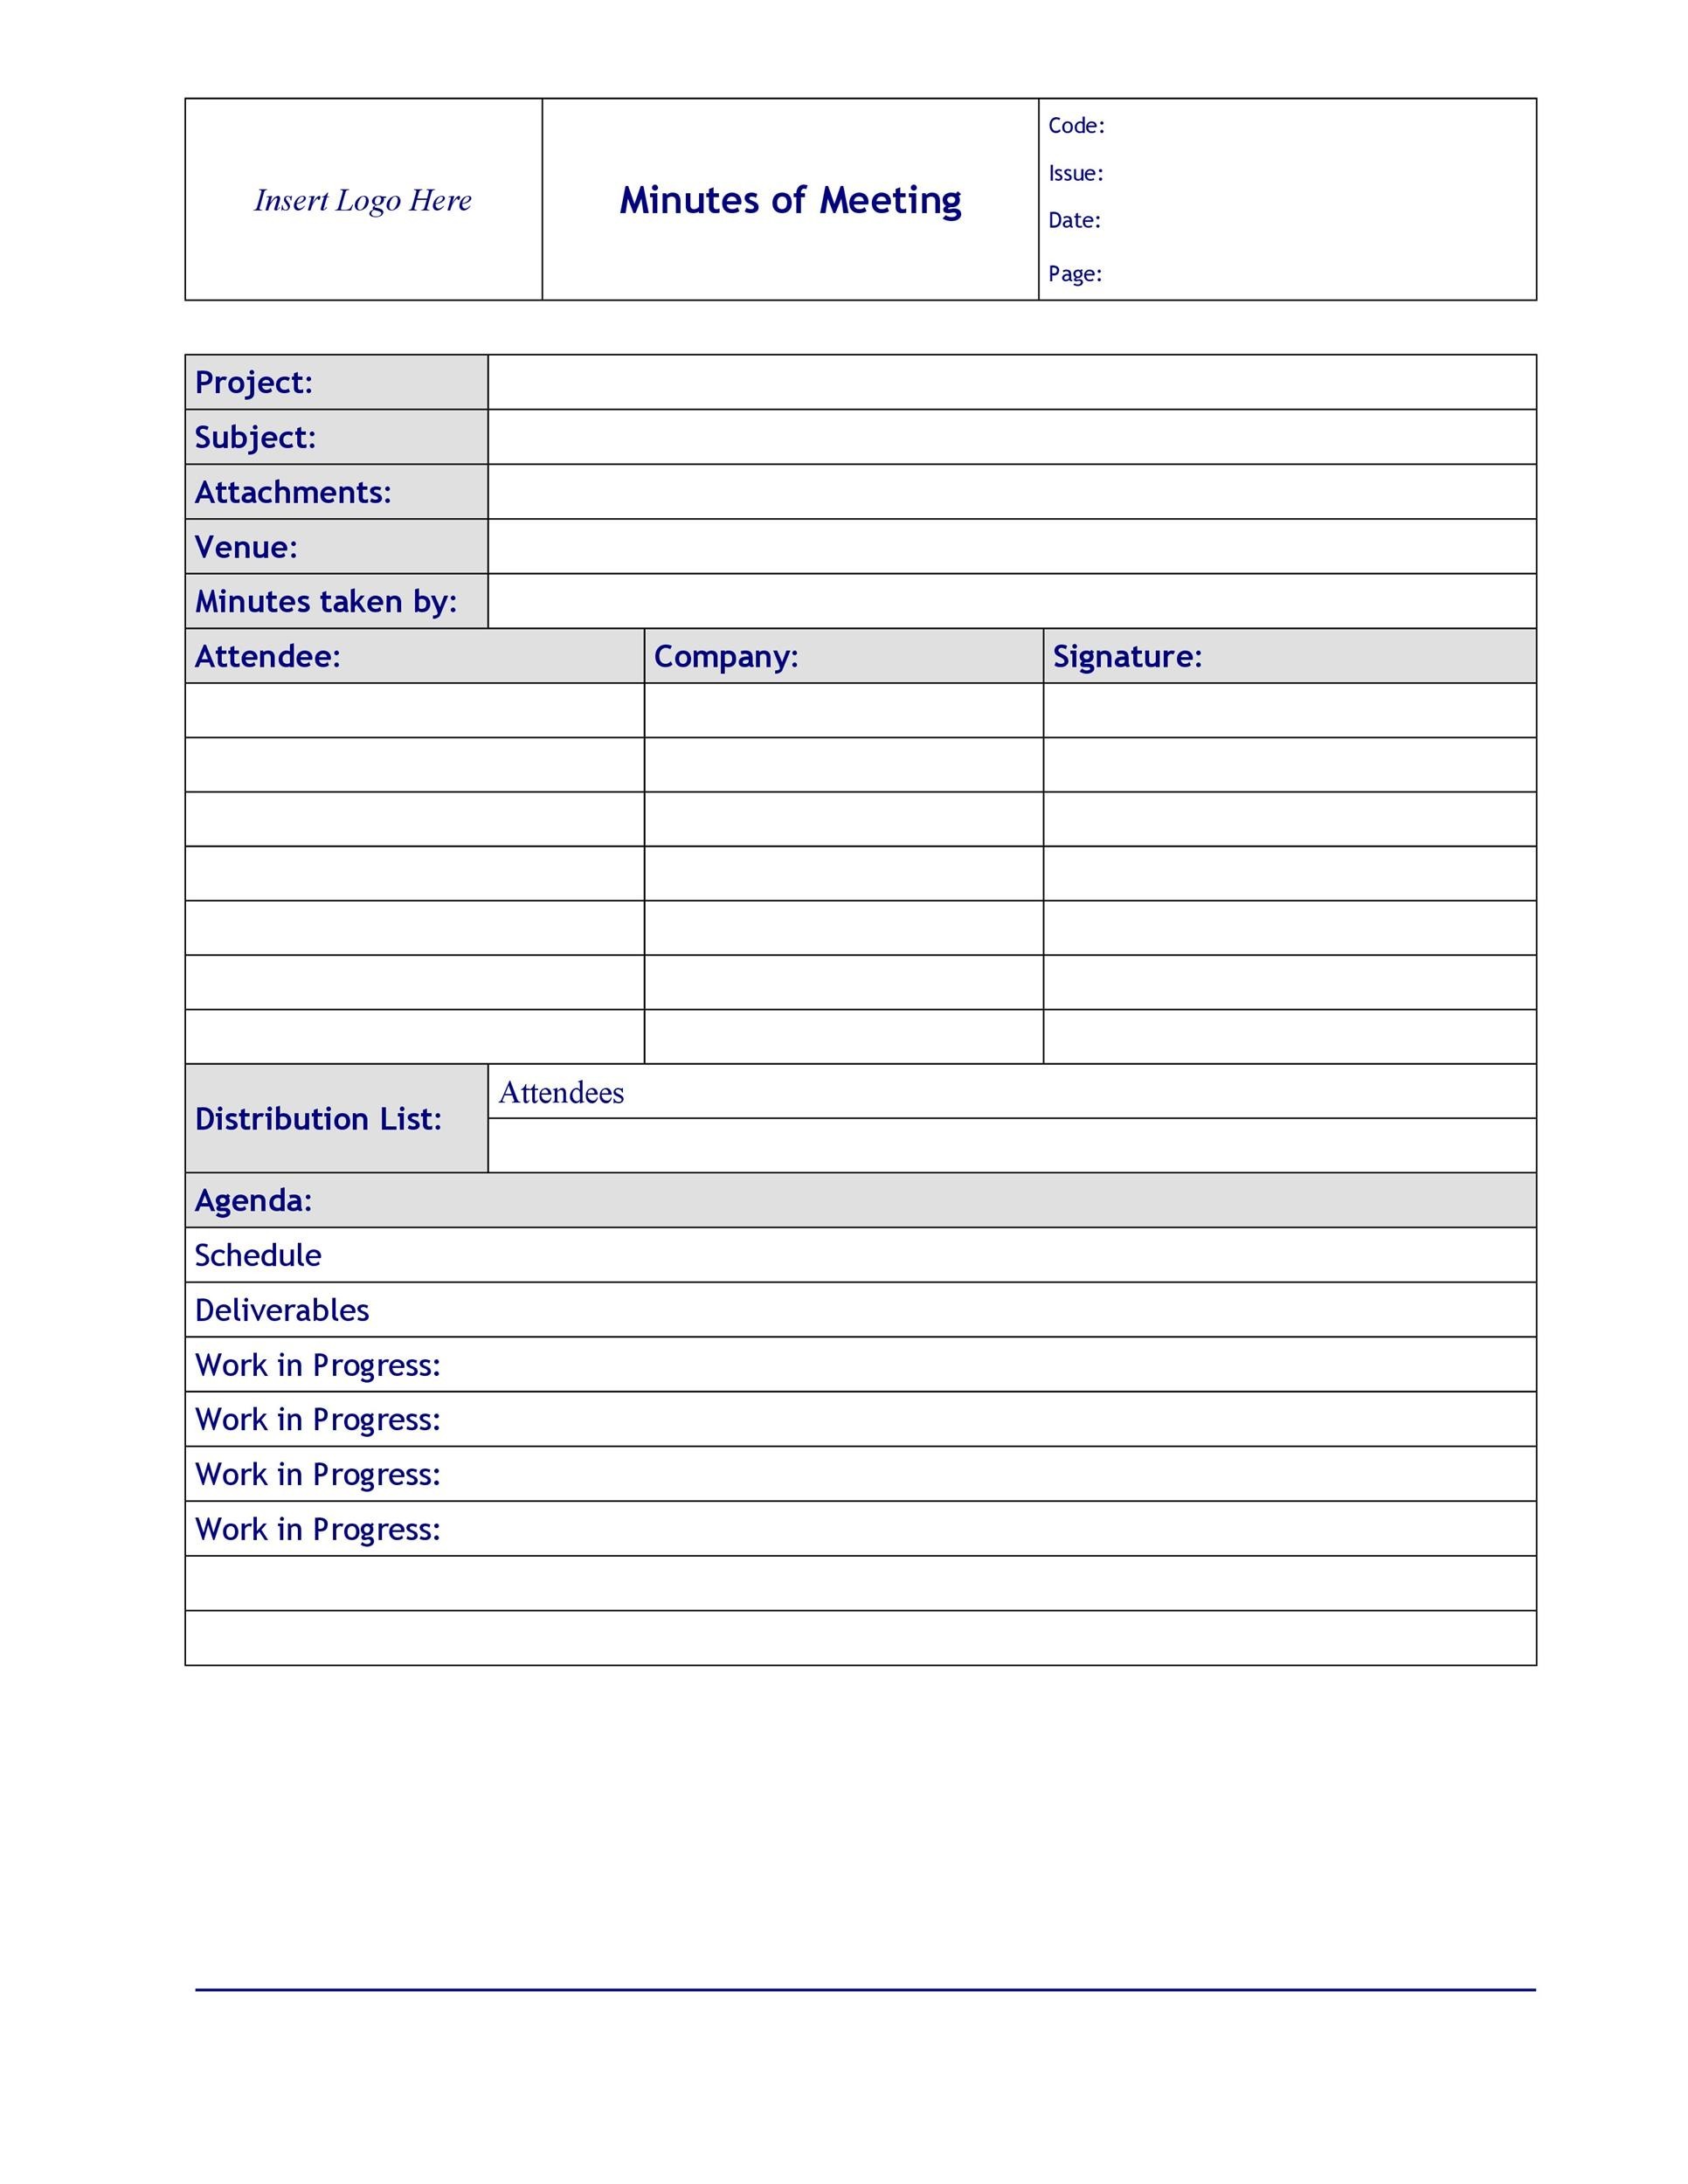 meeting-minutes-format-free-word-templates